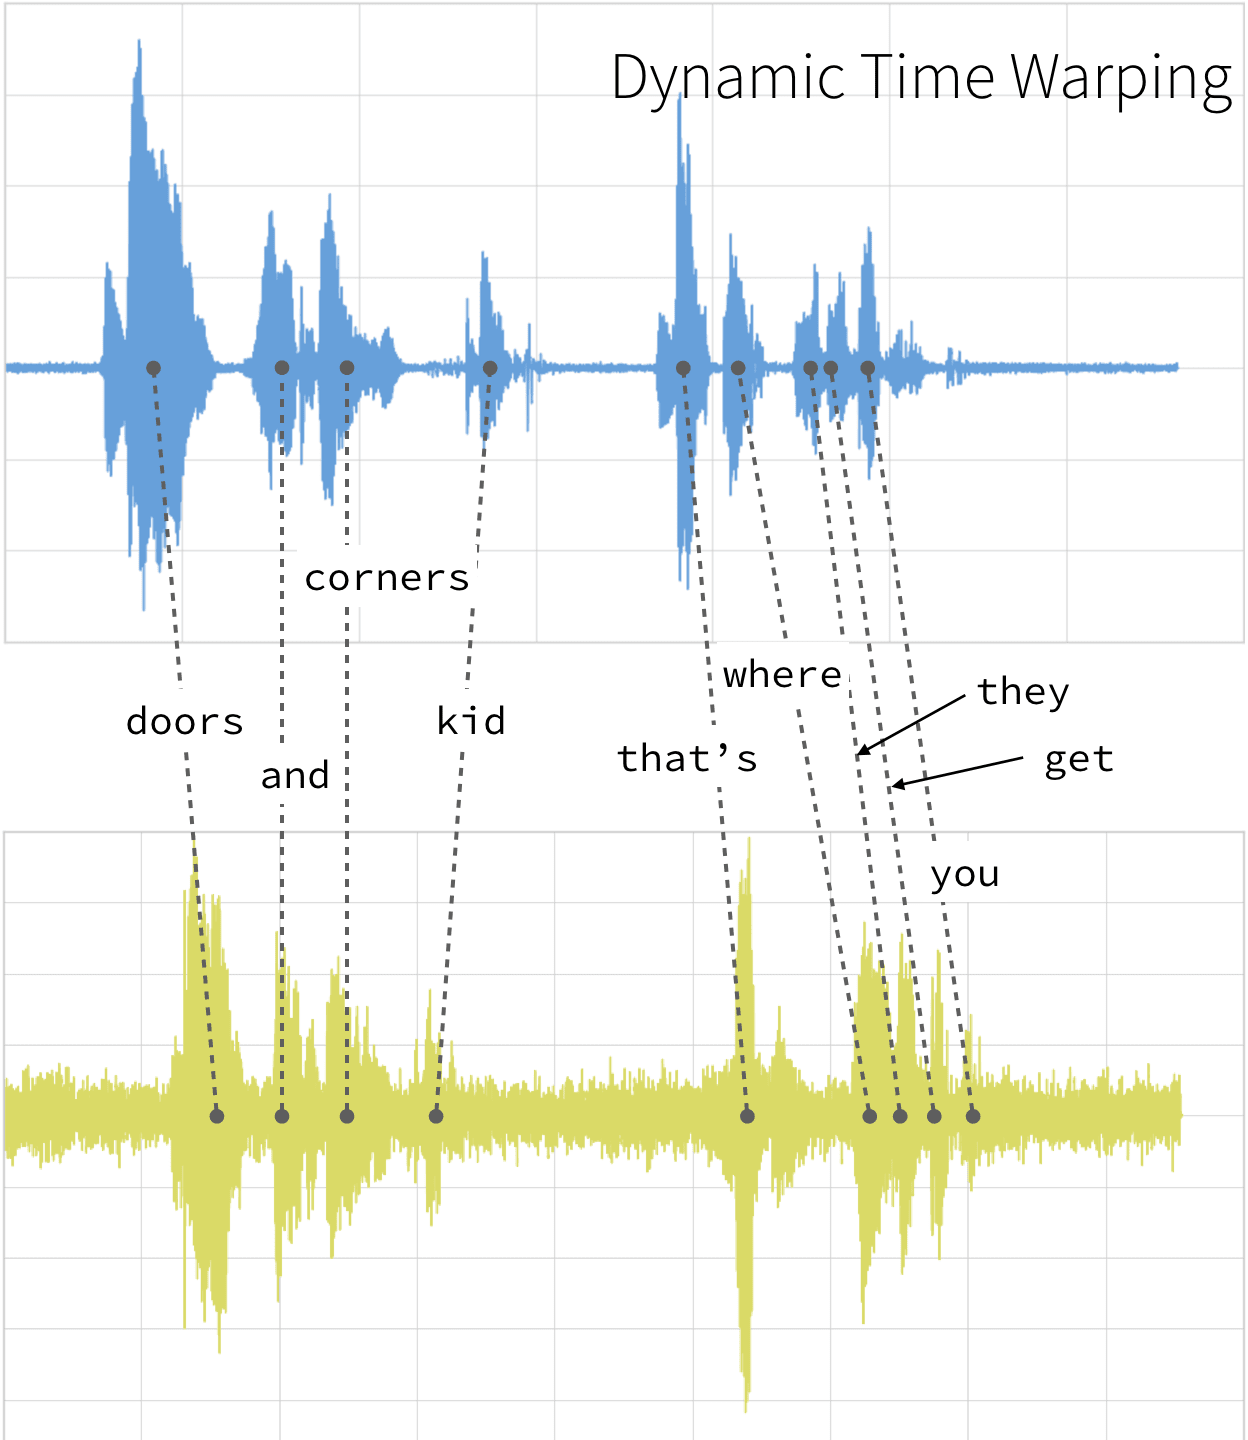 Dynamic time warping is a technique used in speech recognition to determine the optimum distance between the elements. 